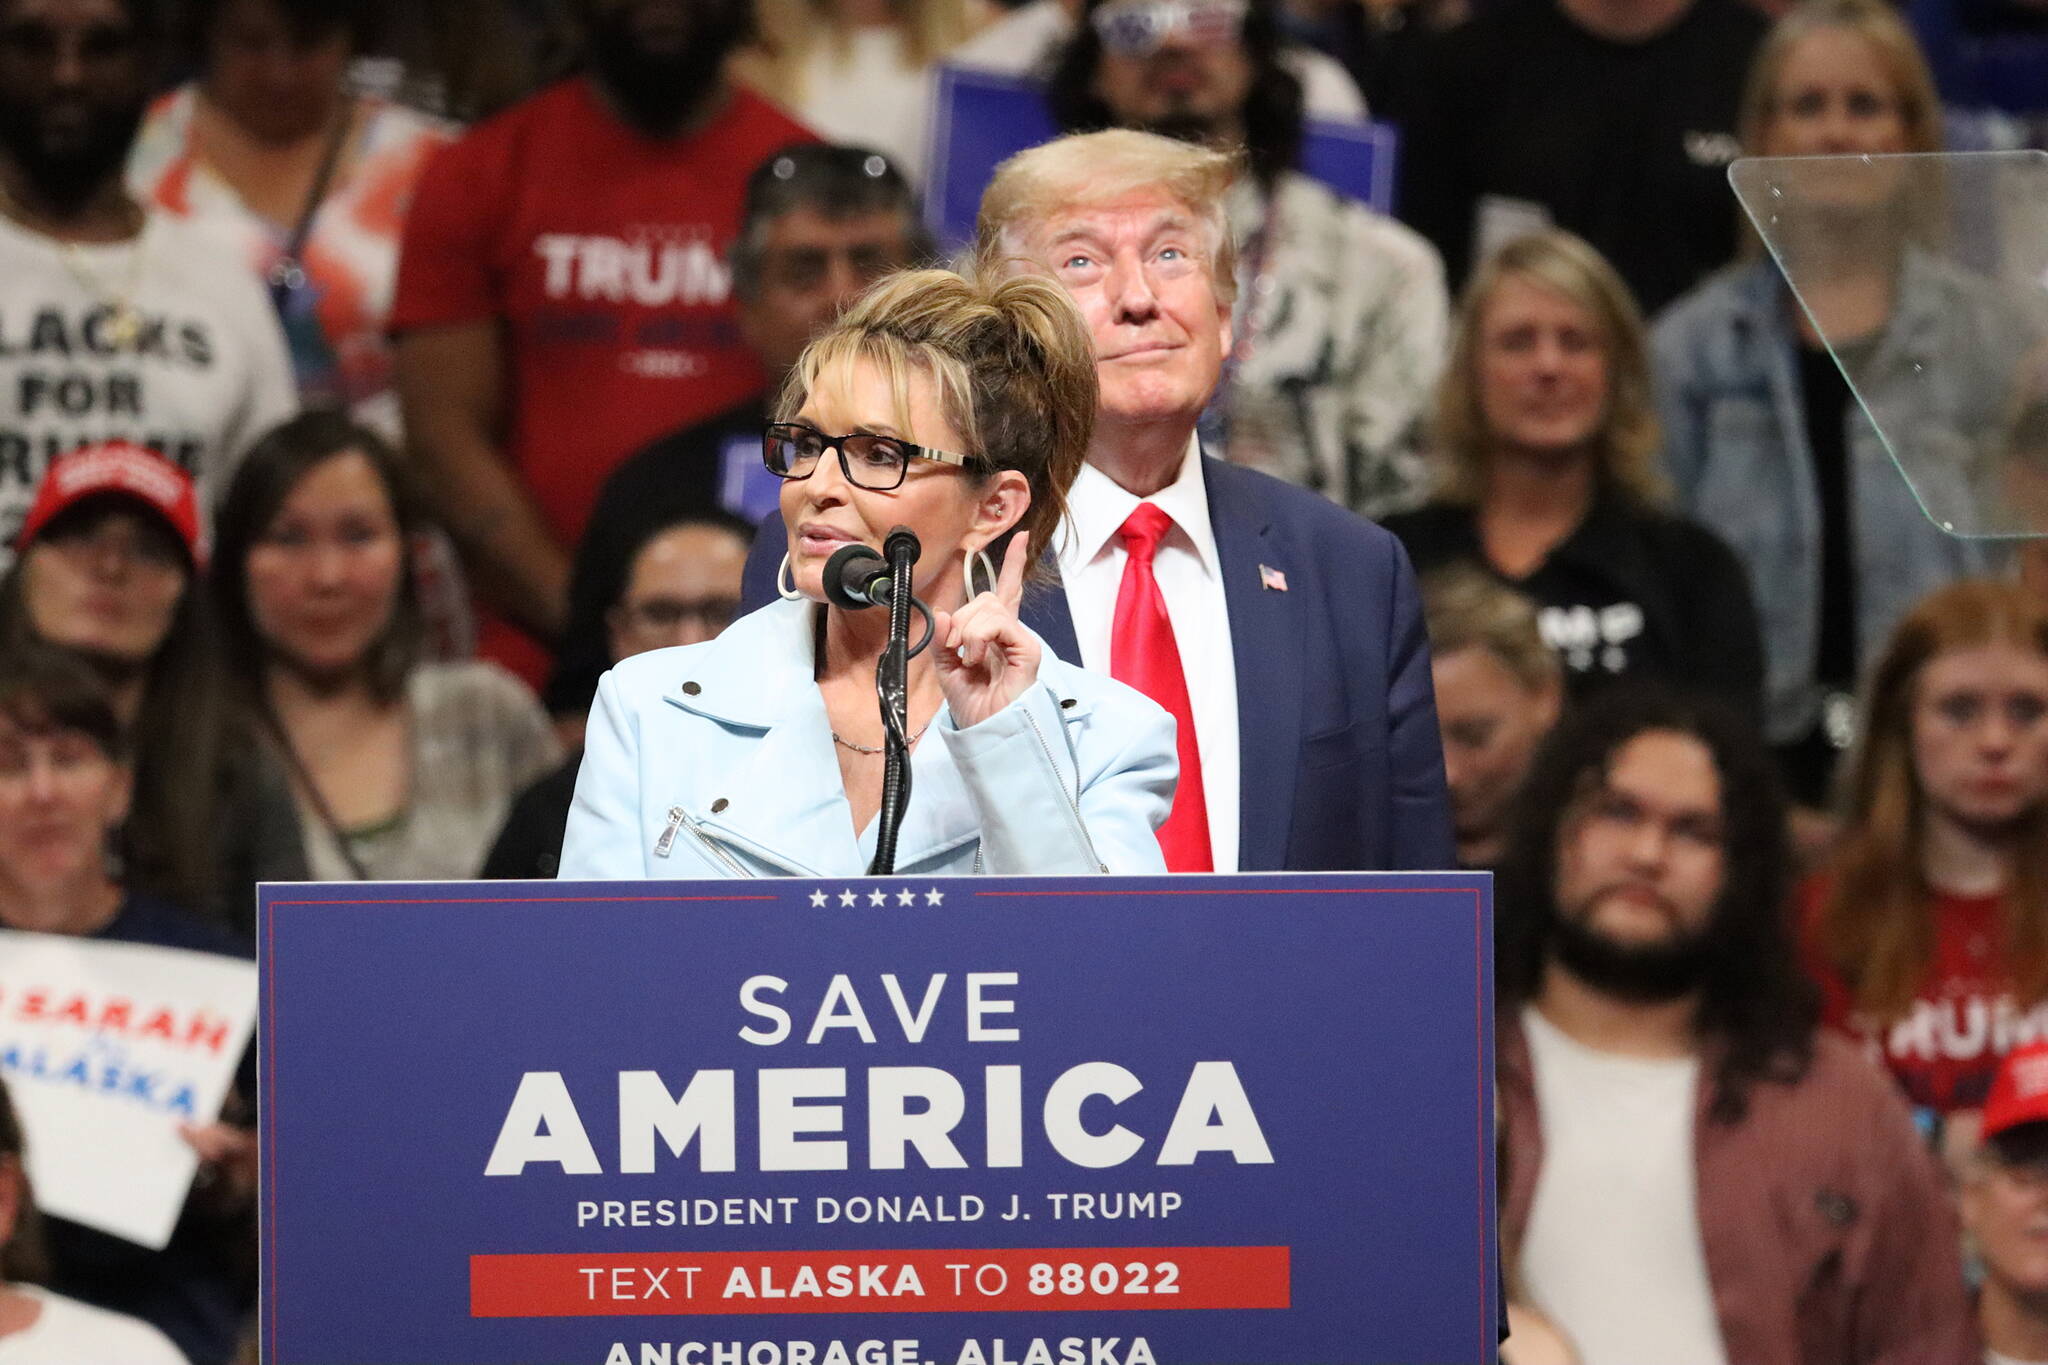 Former Gov. Sarah Palin, who is seeking Alaska’s lone seat in the U.S. House of Representatives, joined former President Donald Trump for a Save America rally in Anchorage. Palin was an early backer of Trump’s presidential campaign. (Mark Sabbatini / Juneau Empire)